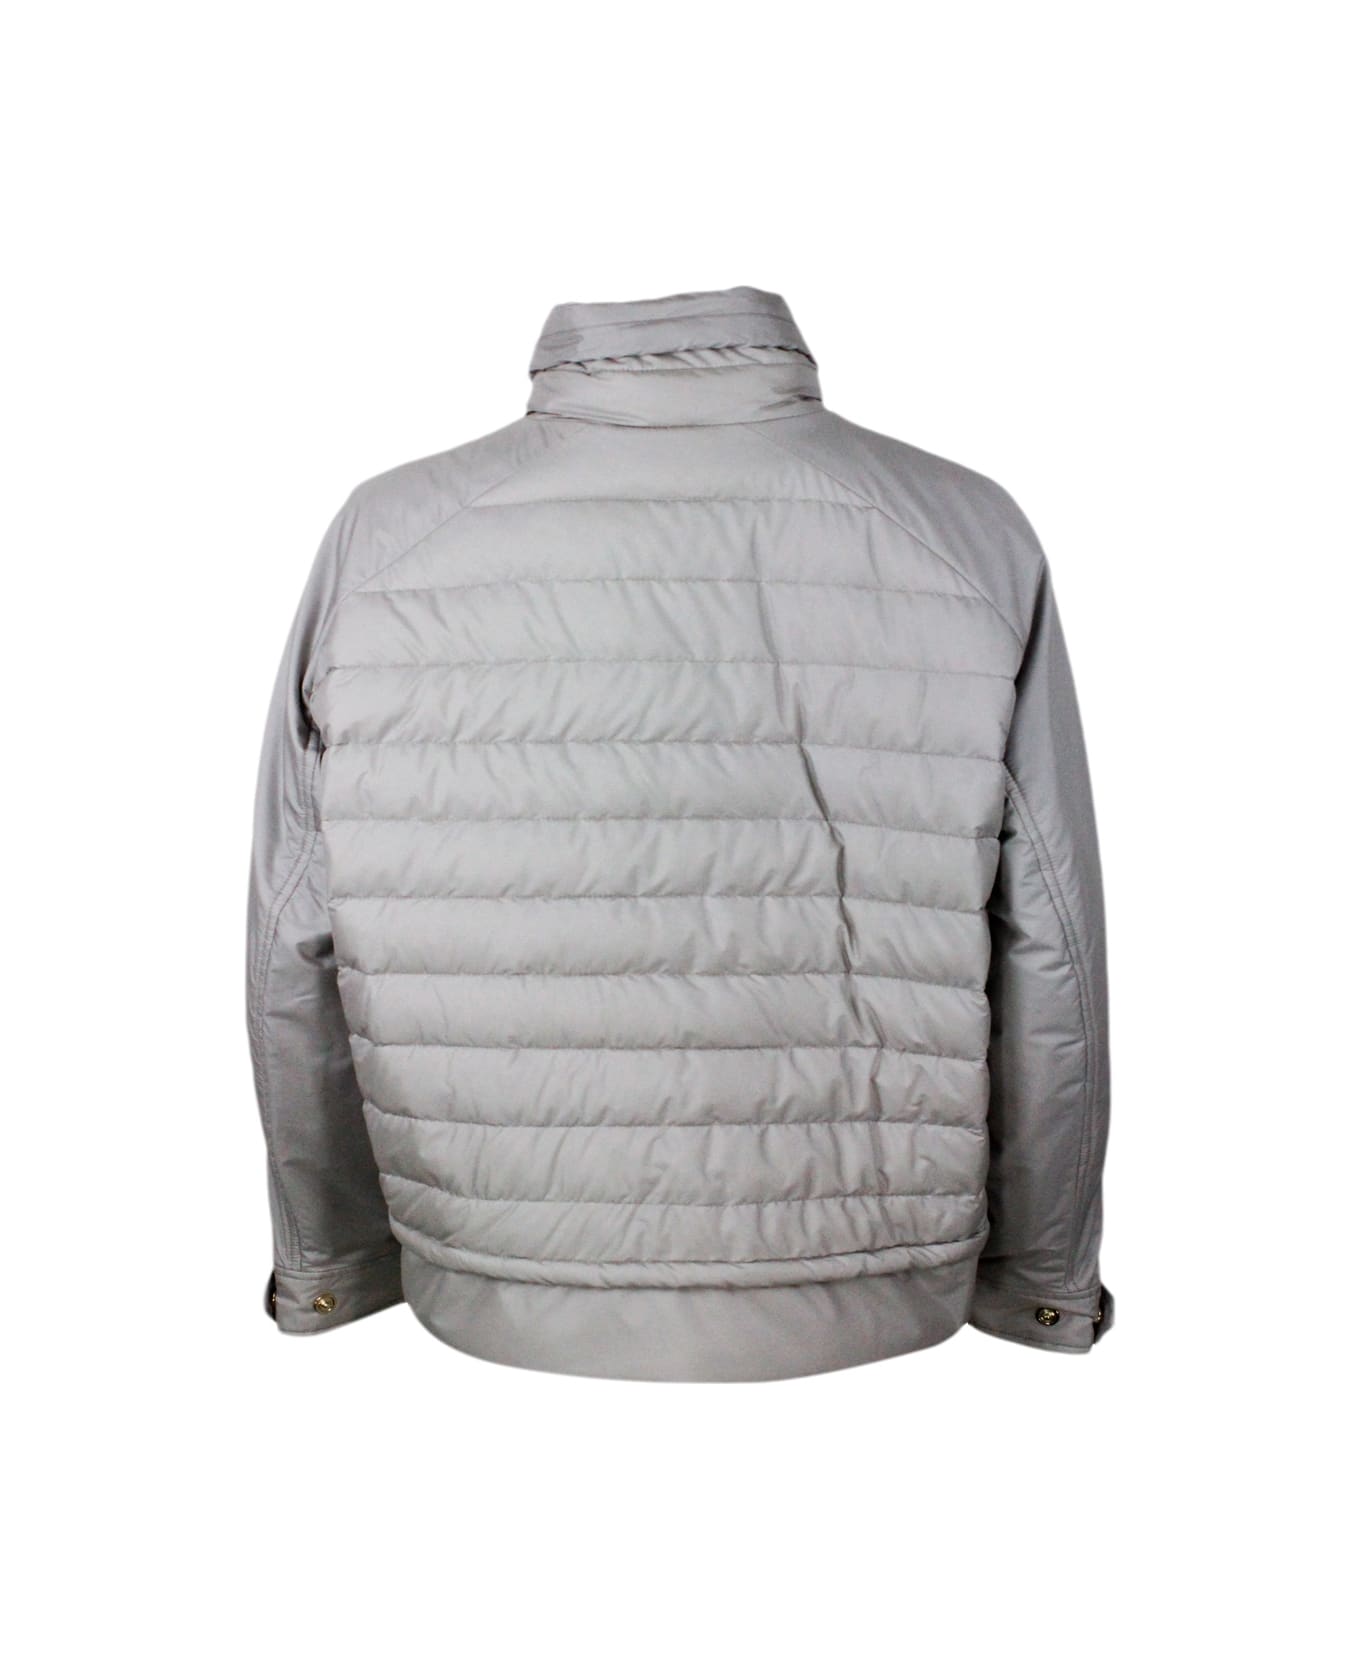 Moorer Lightweight 100 row Fine Down Jacket With An A-line Shape And Adjustable Drawstring At The Hem And Neck. Zip Closure - Ice